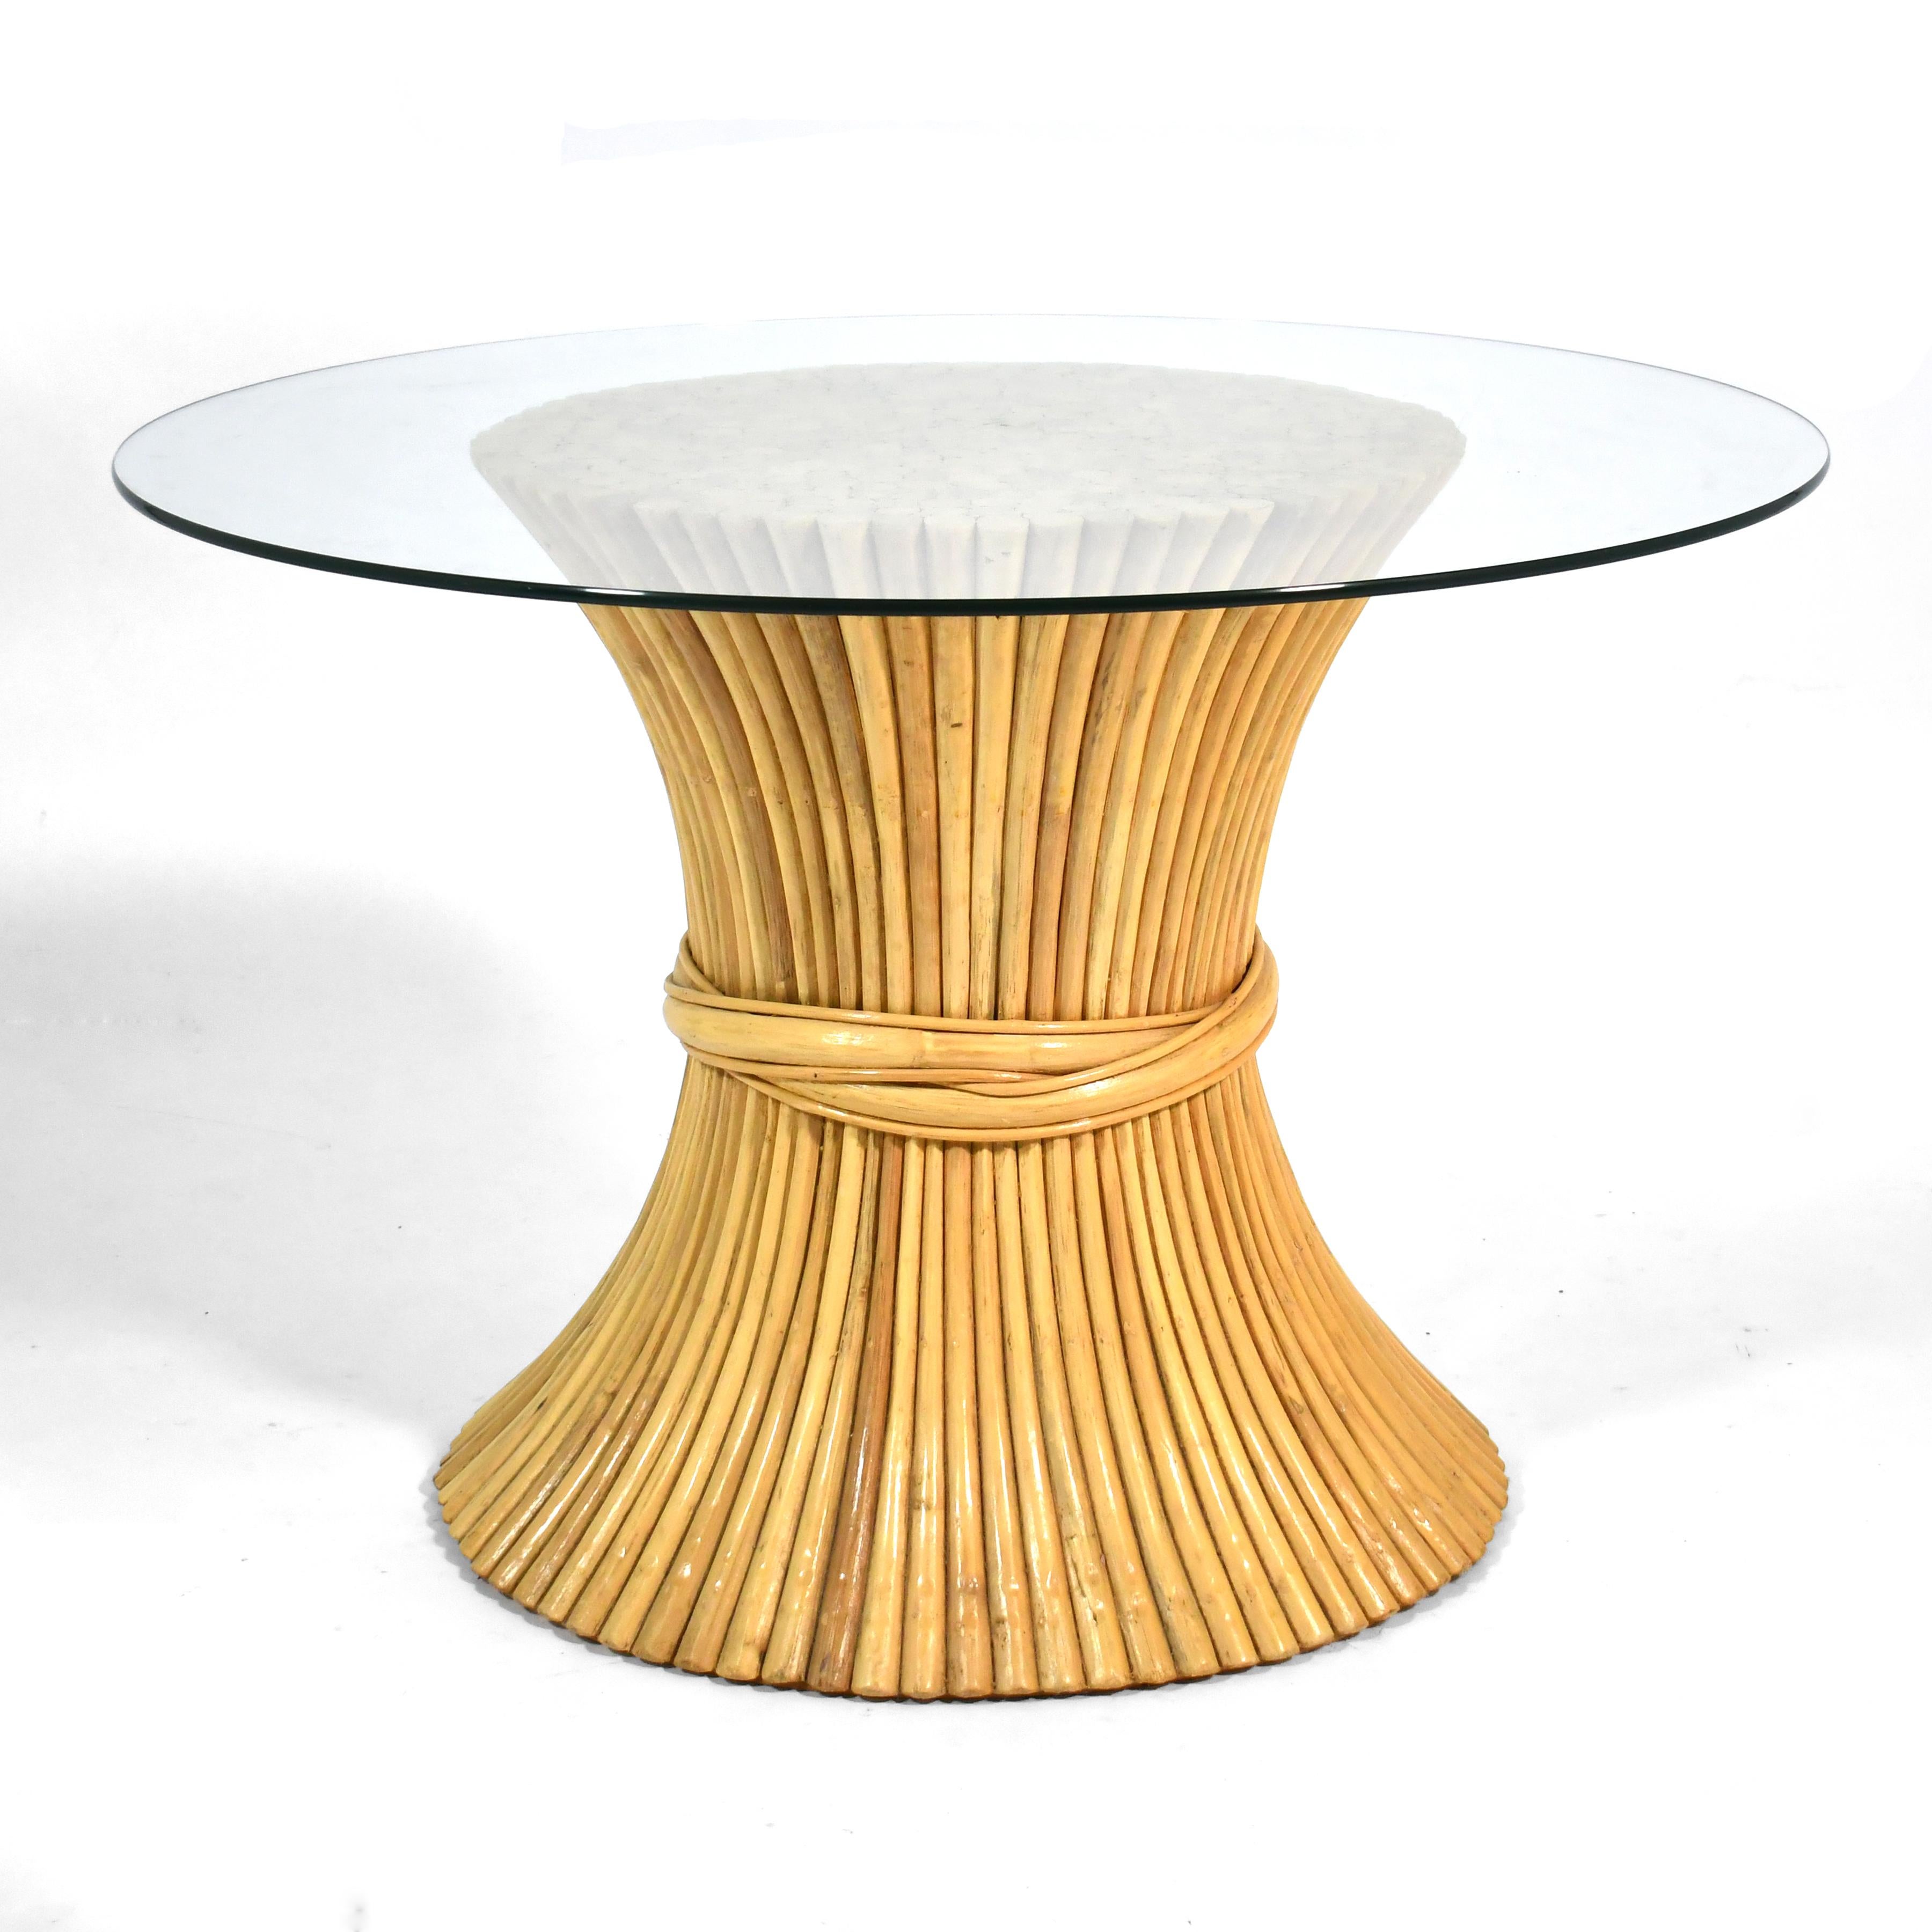 This elegant piece is the perfect center table, and can also serve as a dining table. One of Elinor McGuire's most iconic and enduring designs for McGuire of San Fransisco, the NP-10 dining table has a base of rattan gathered at the waist like a